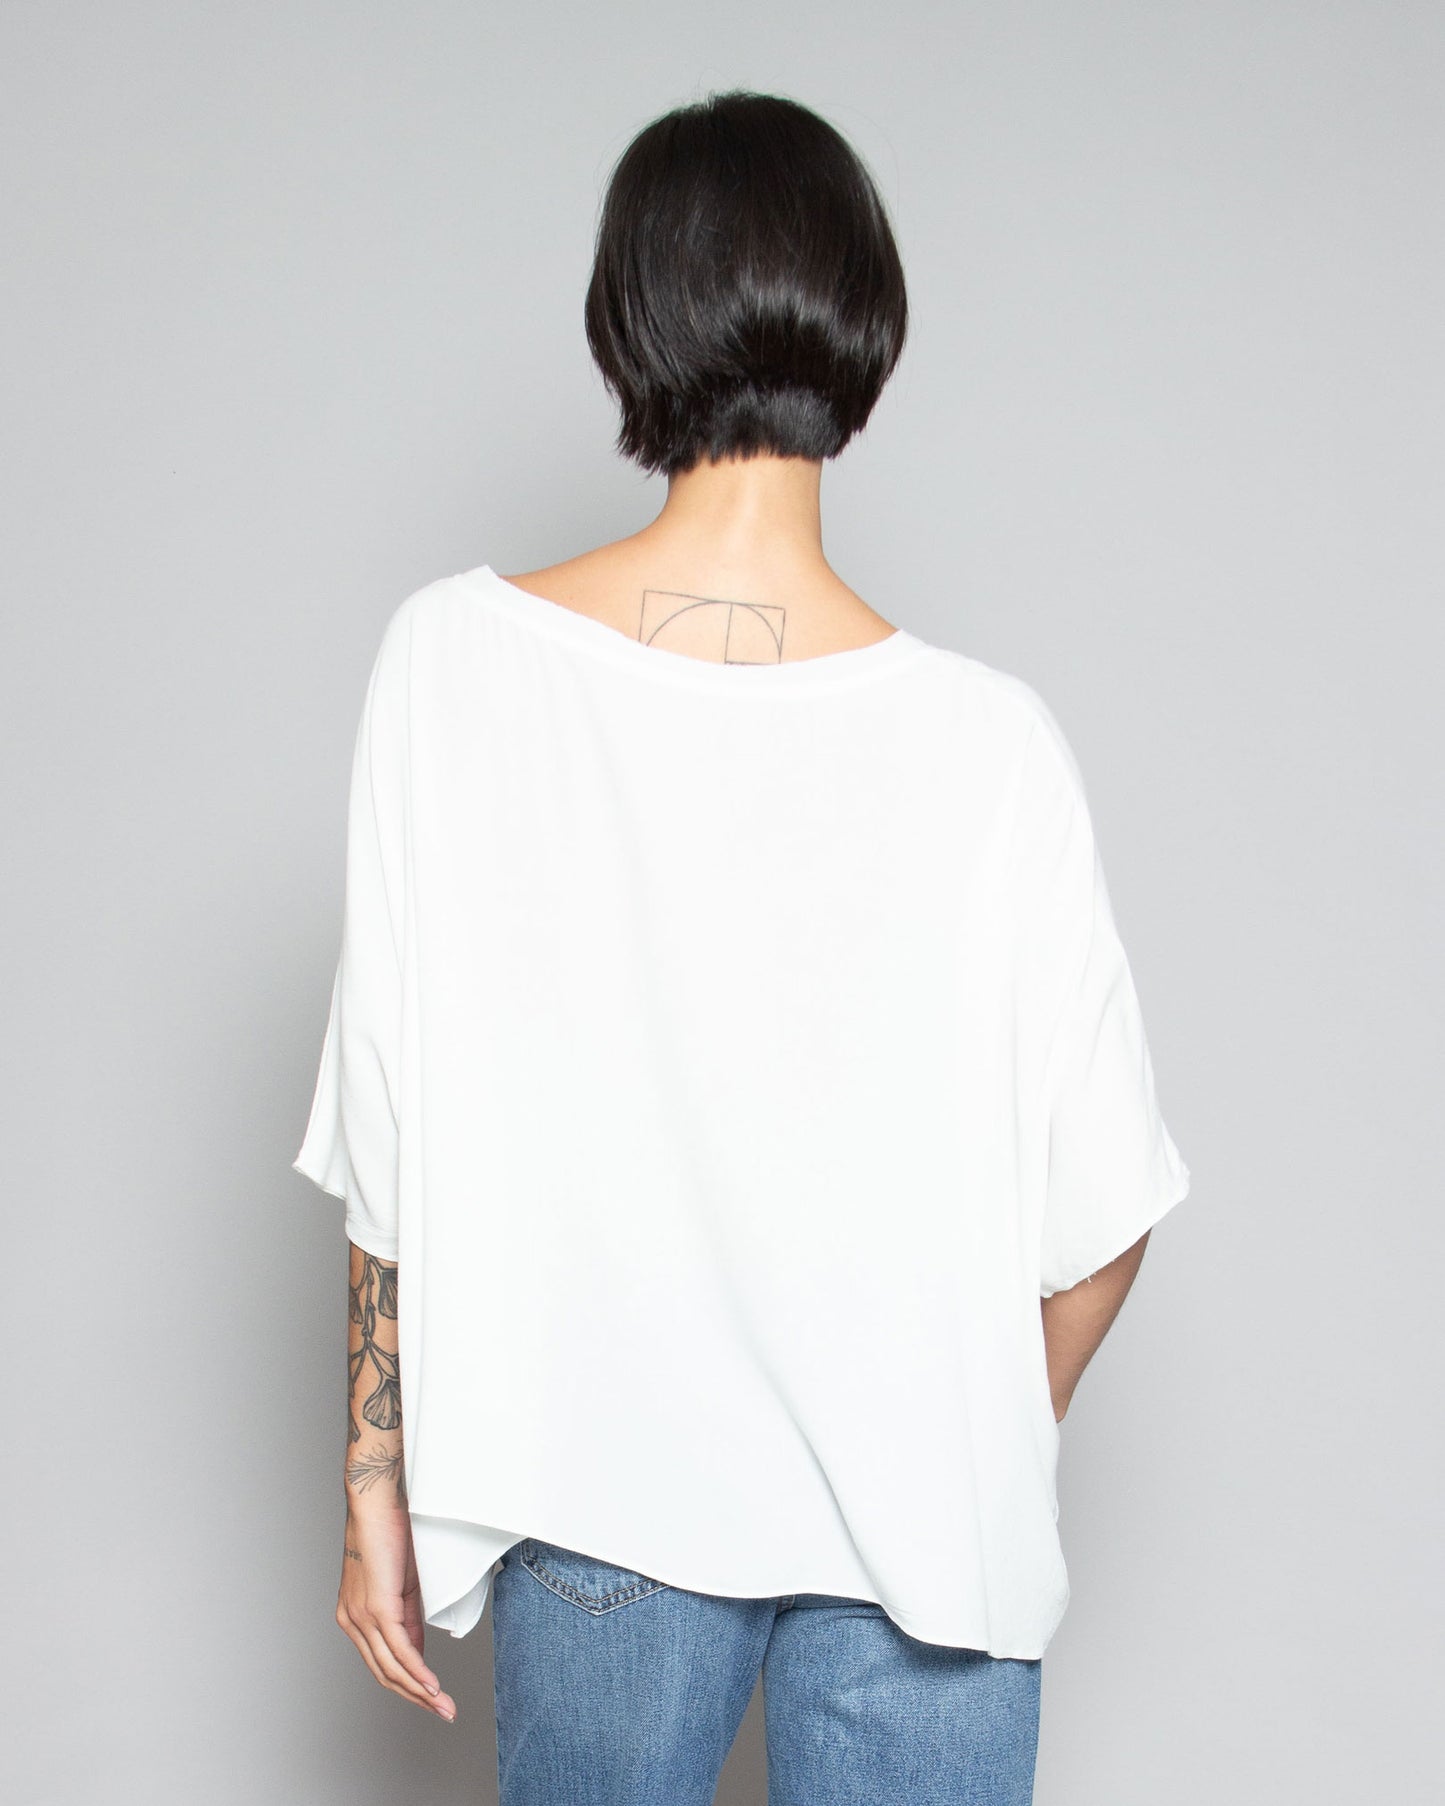 PERSONS Quinn Relaxed Tee in Chalk available at Lahn.shop